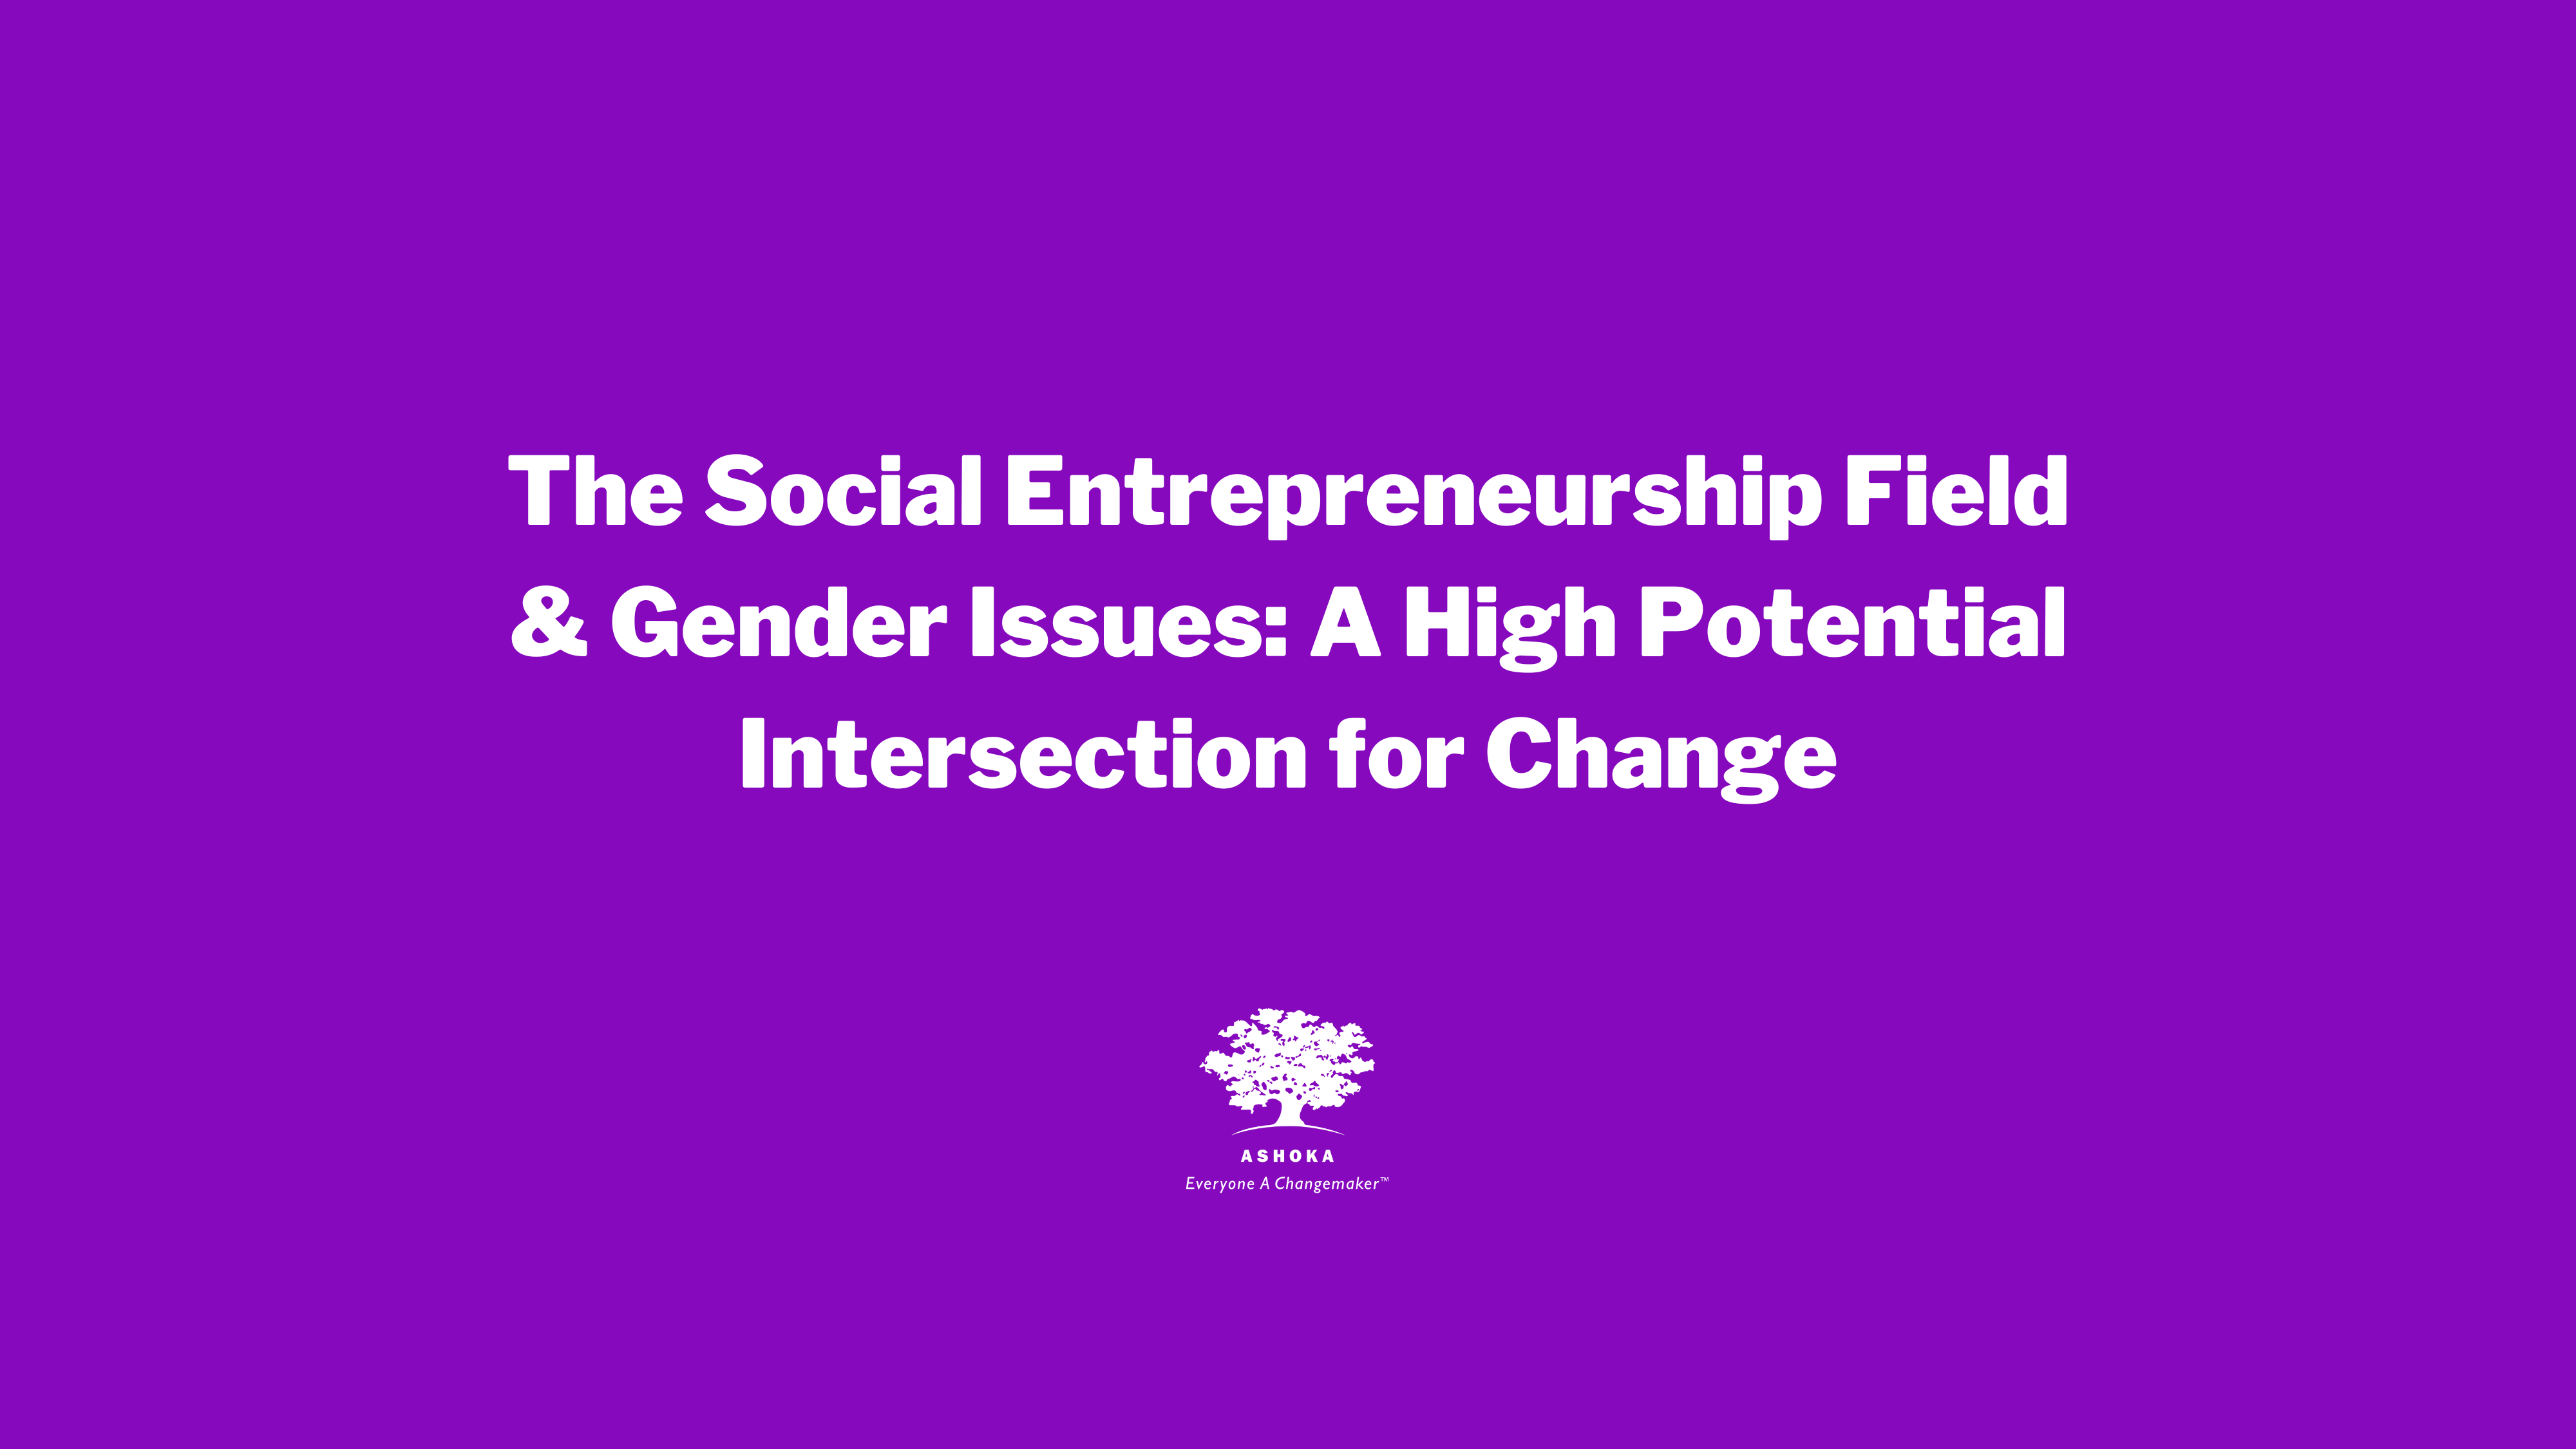 The Social Entrepreneurship Field & Gender Issues A High Potential Intersection for Change